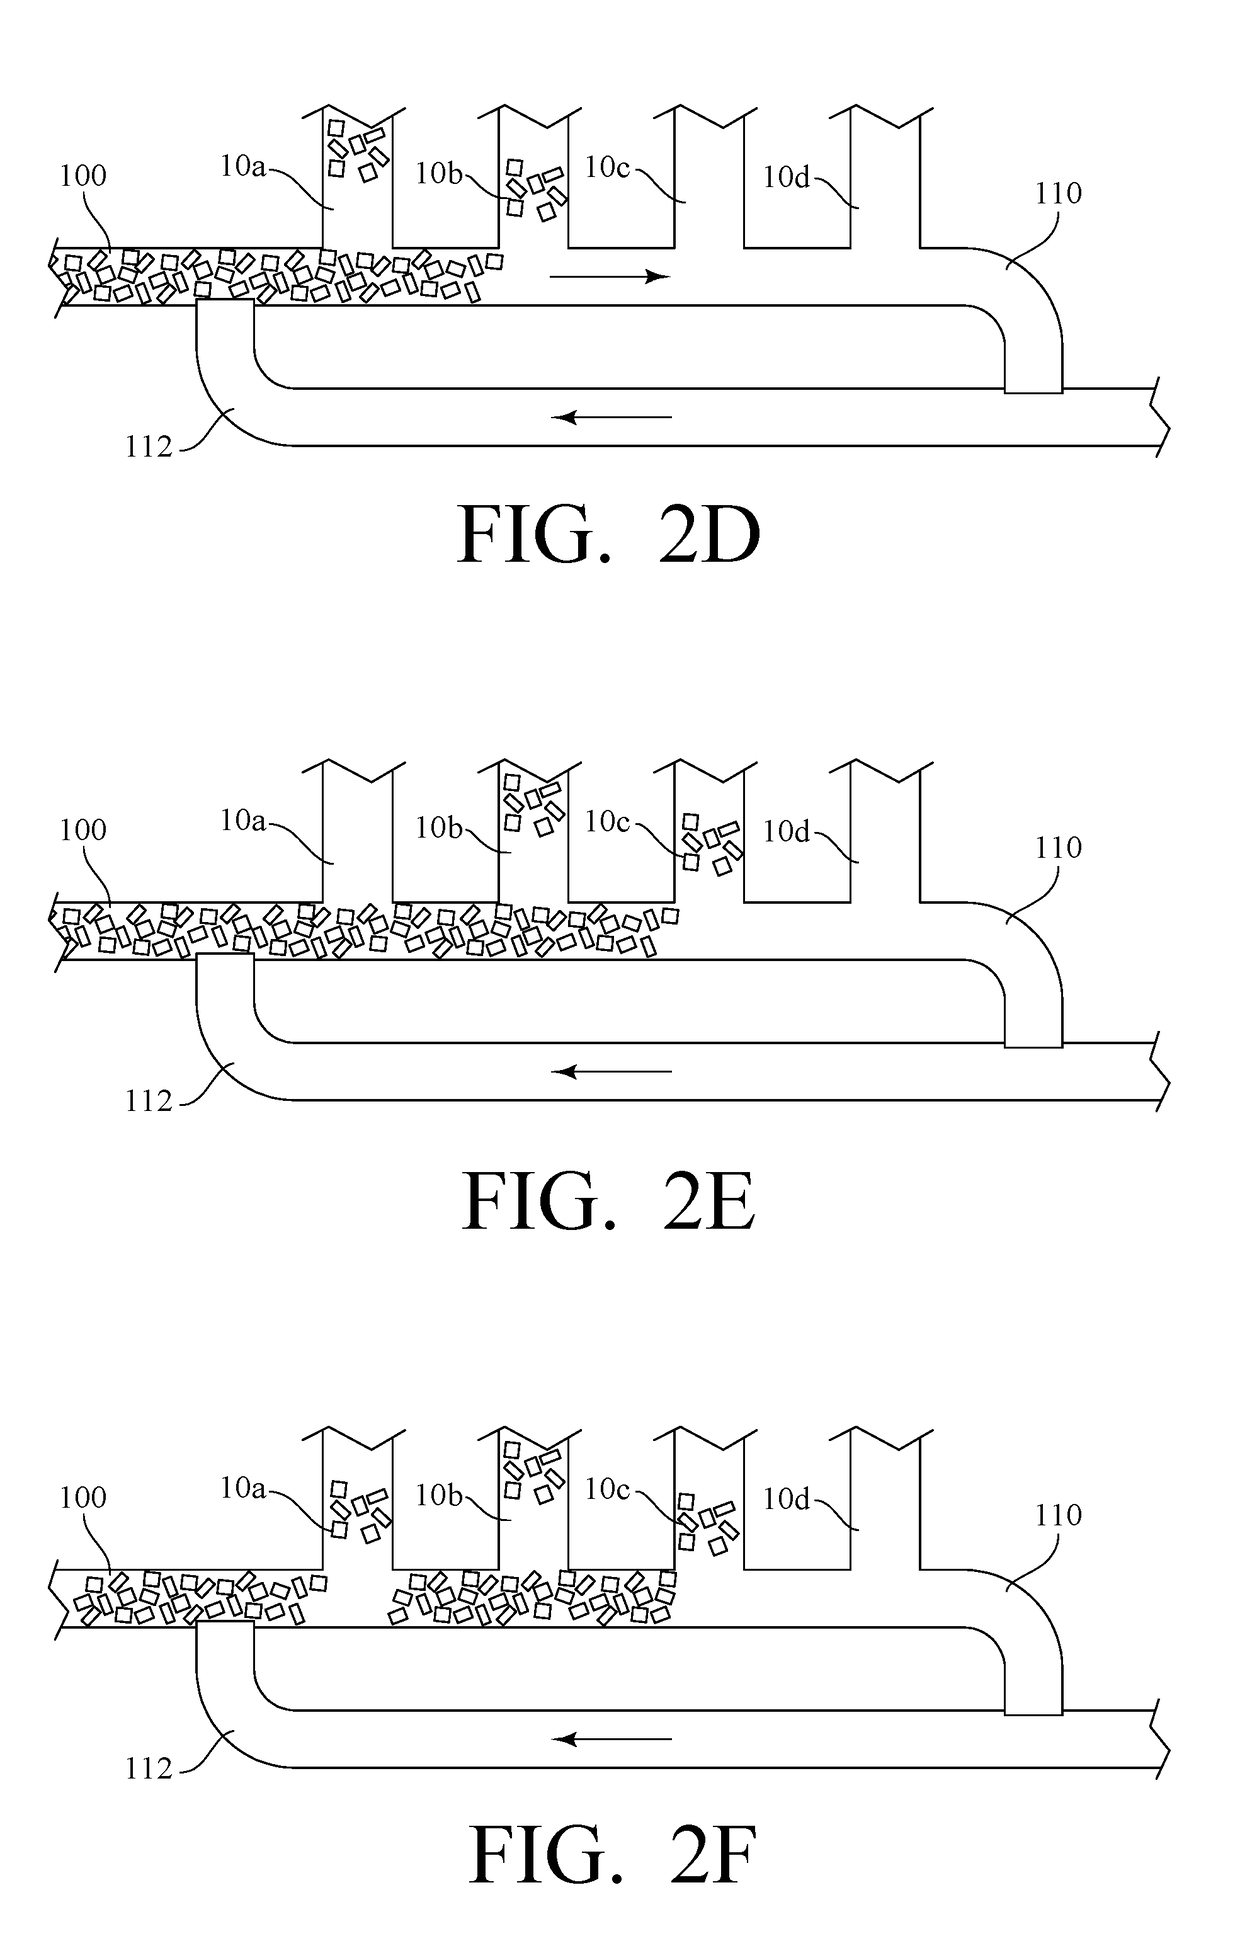 System and method for identifying and transferring parcels from a first conveyor to a second conveyor